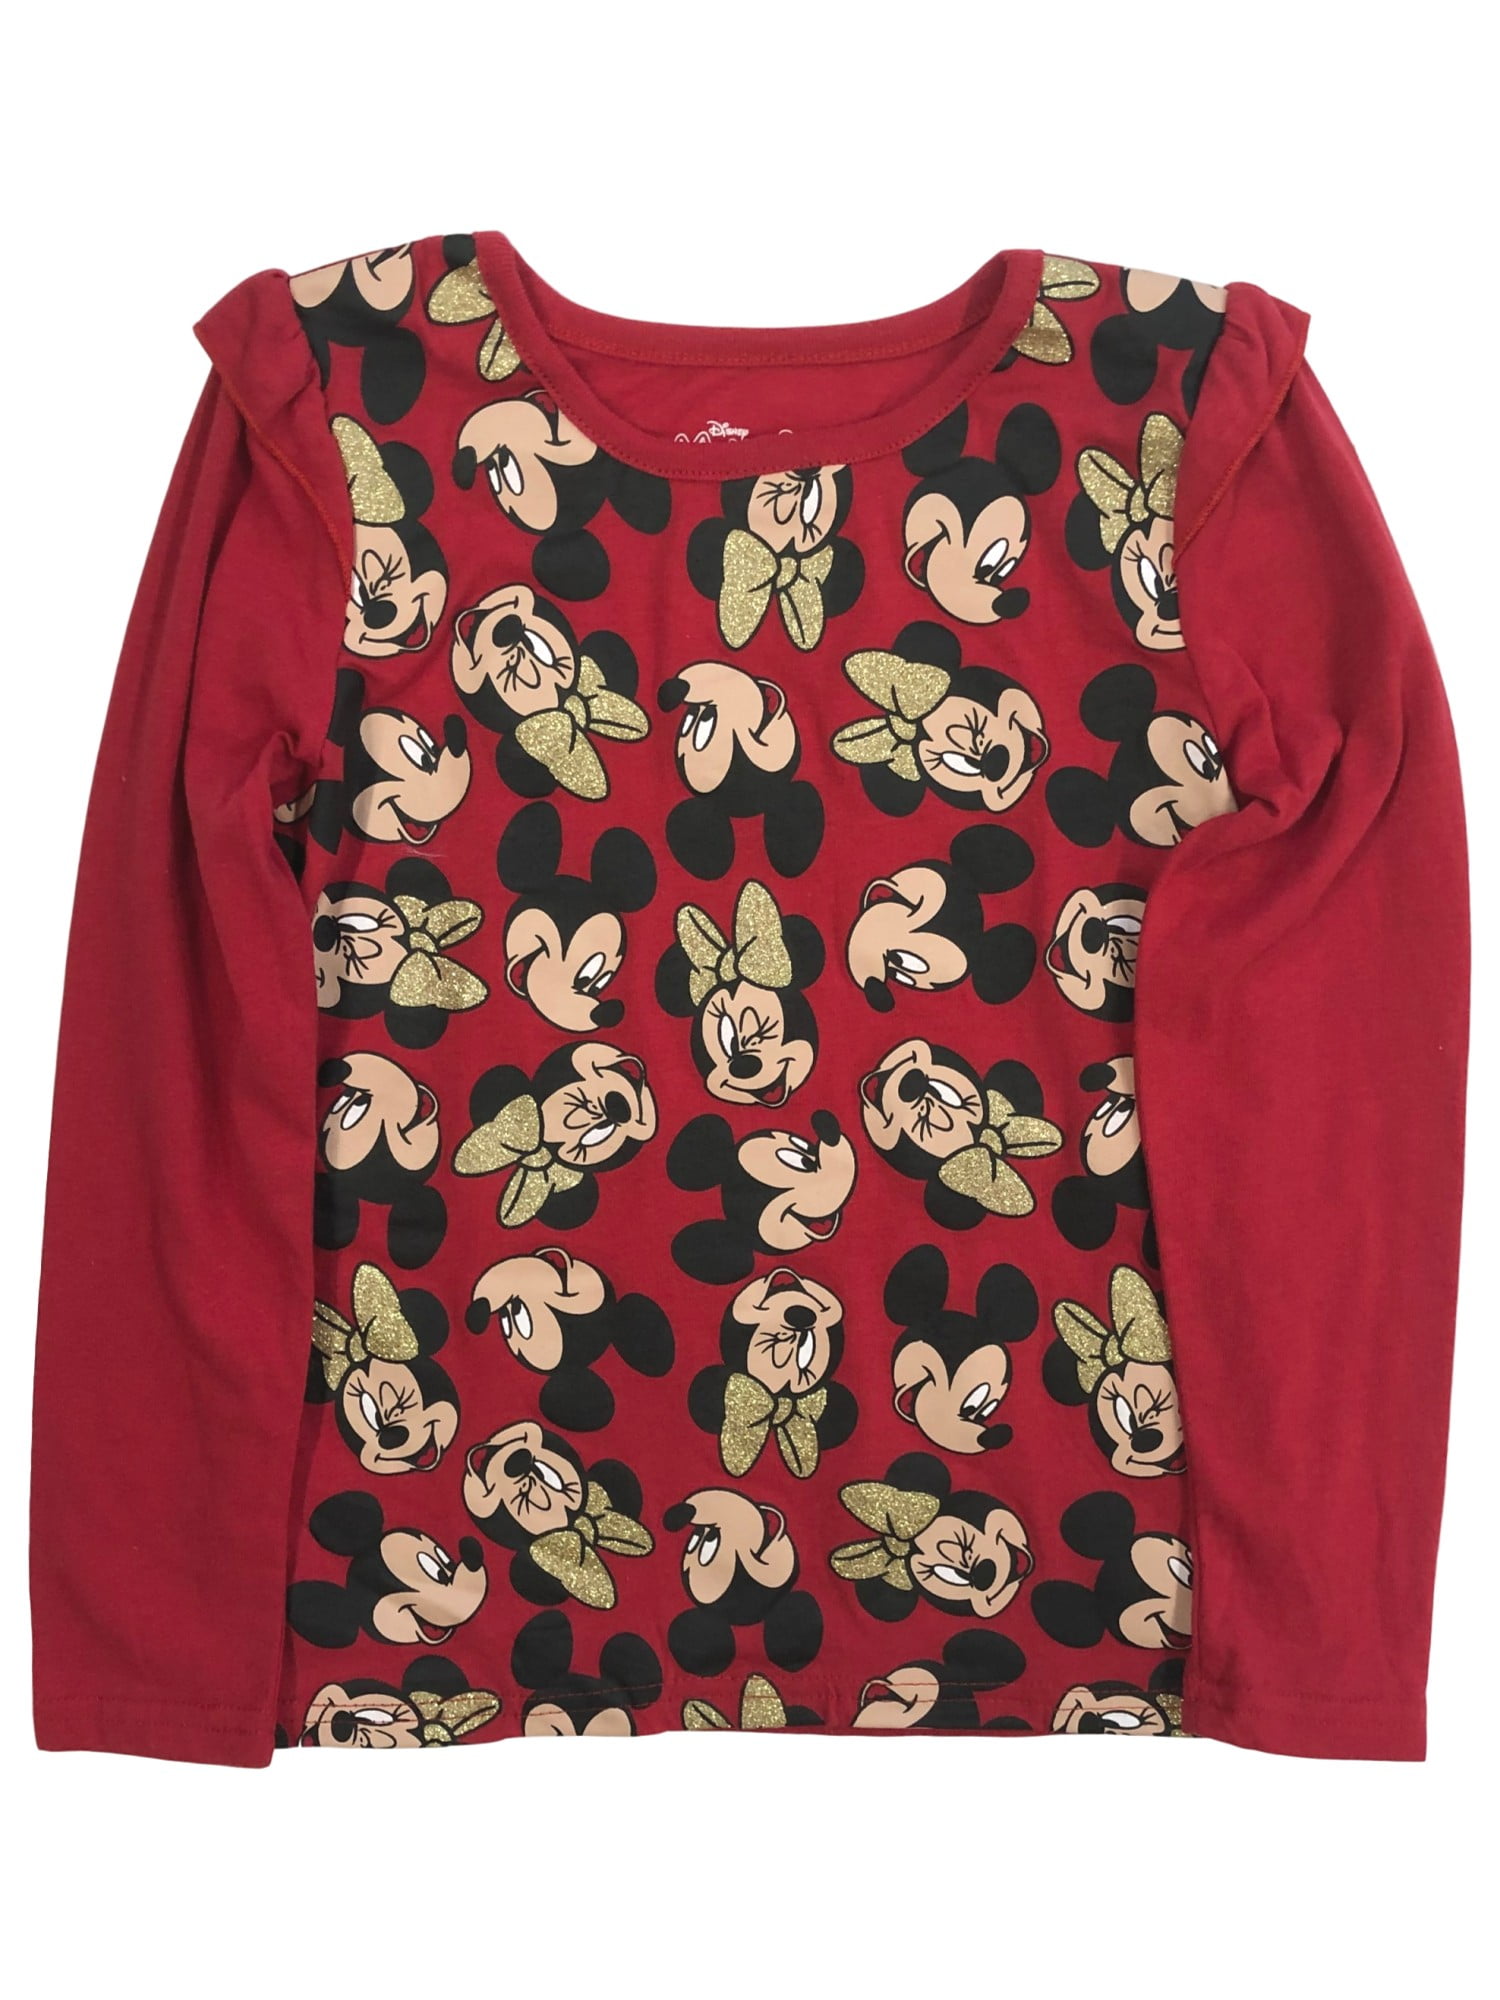 DISNEY MINNIE MOUSE RED SEQUIN SHIRT SIZE S M L XL NEW! 